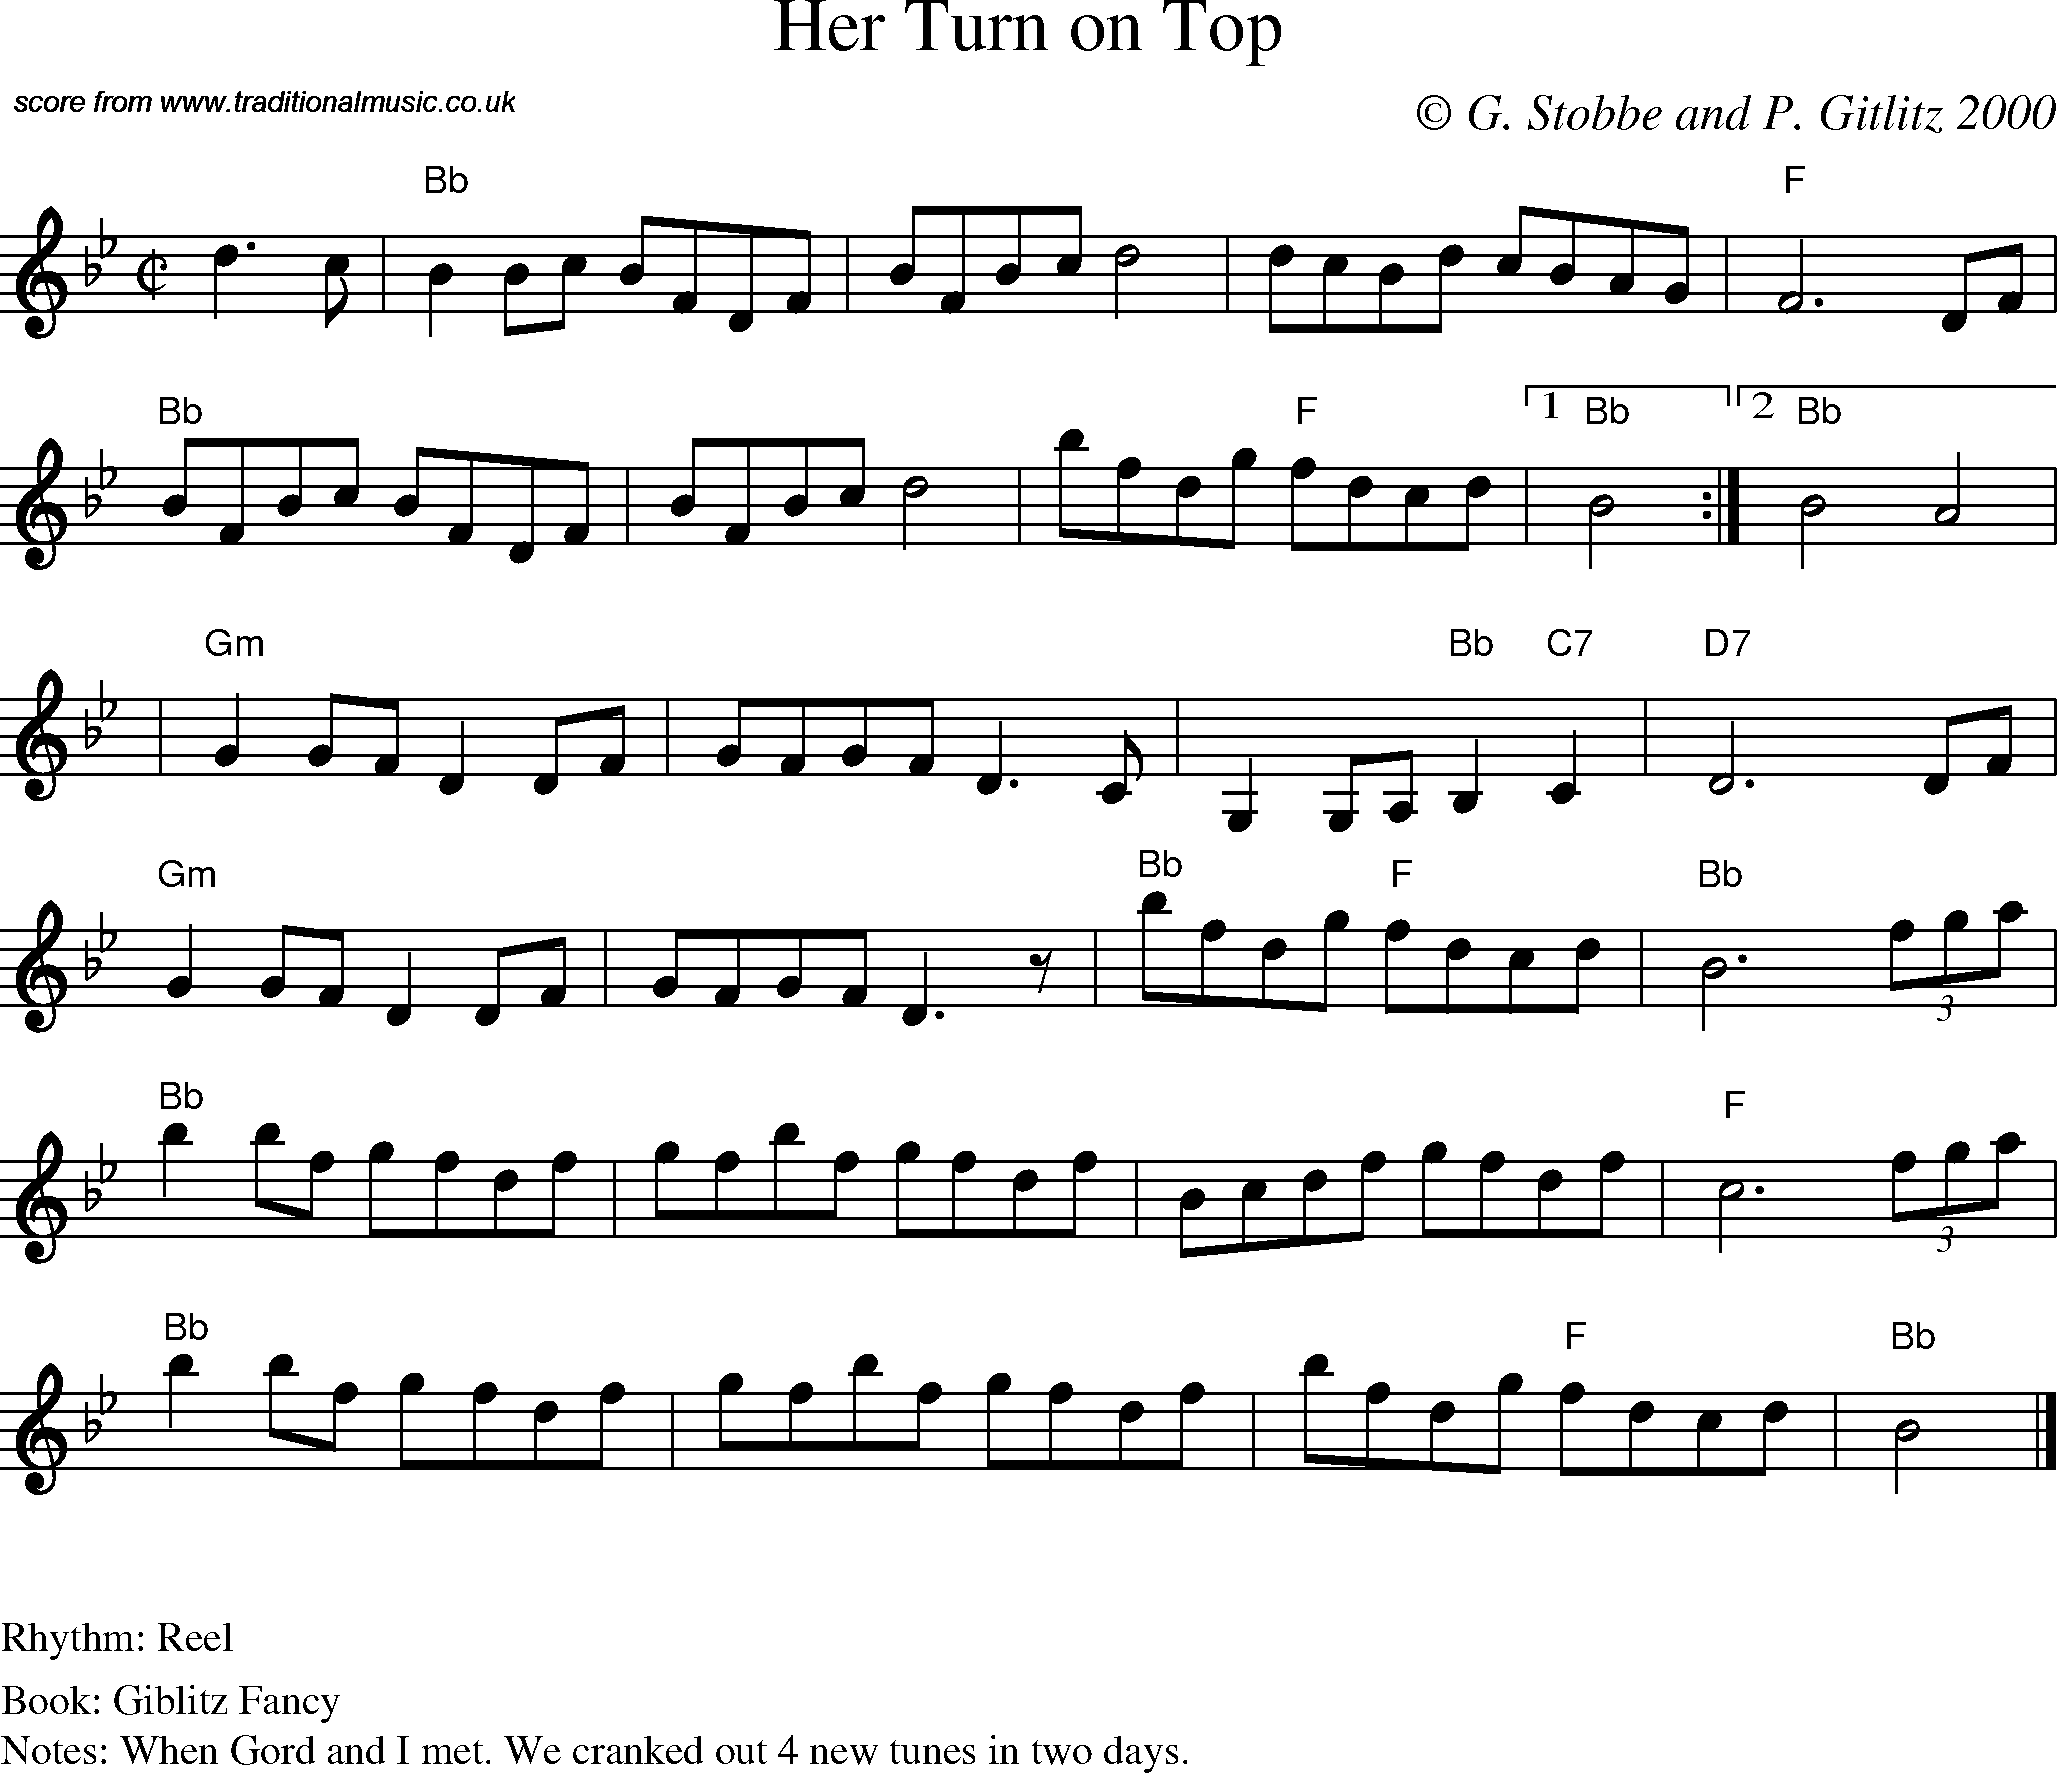 Sheet Music Score for Reel - Her Turn on Top